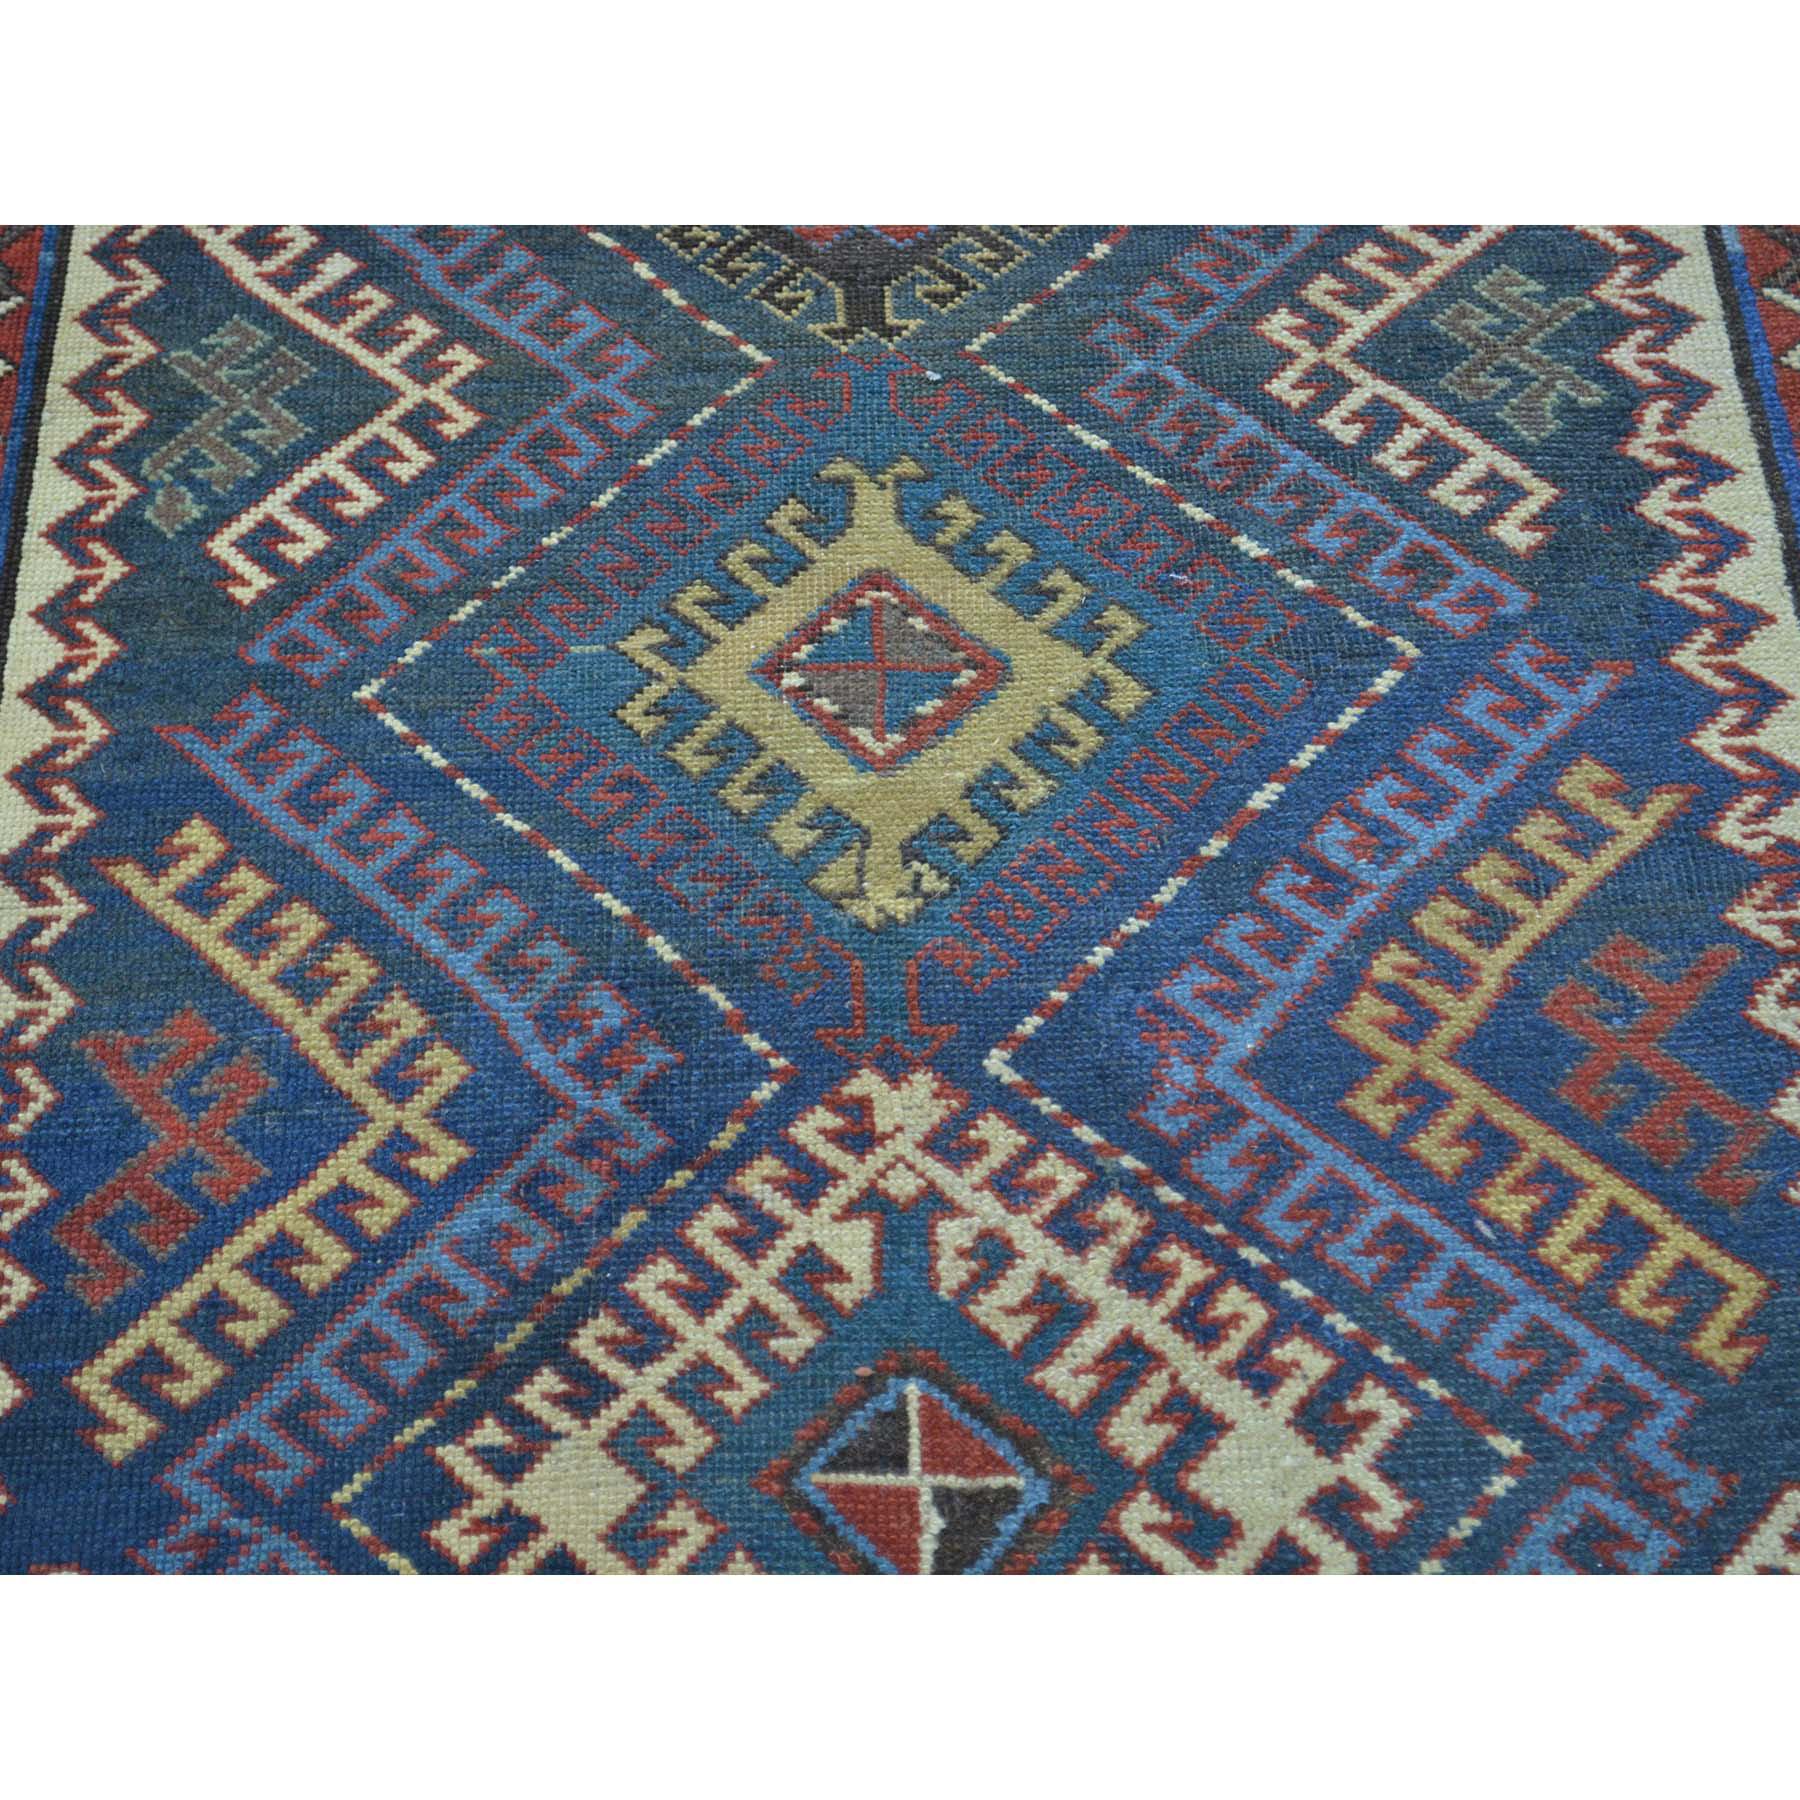 Russian Antique Caucasian Talesh Exc Cond Wide Runner Hand Knotted Rug, 4'0